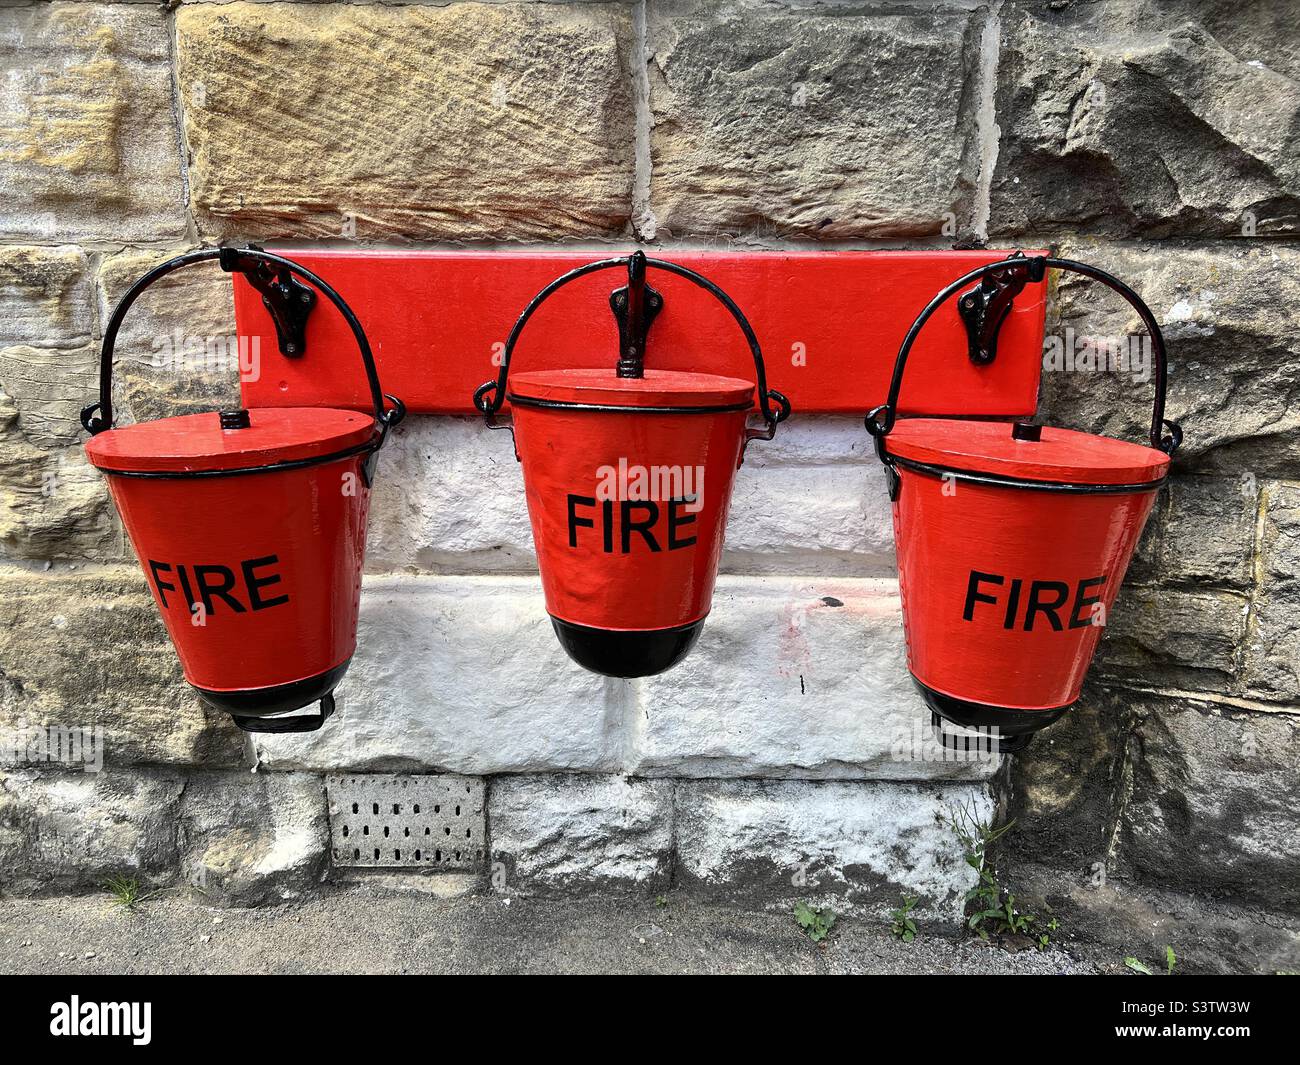 Three red fire buckets at a railway station Stock Photo